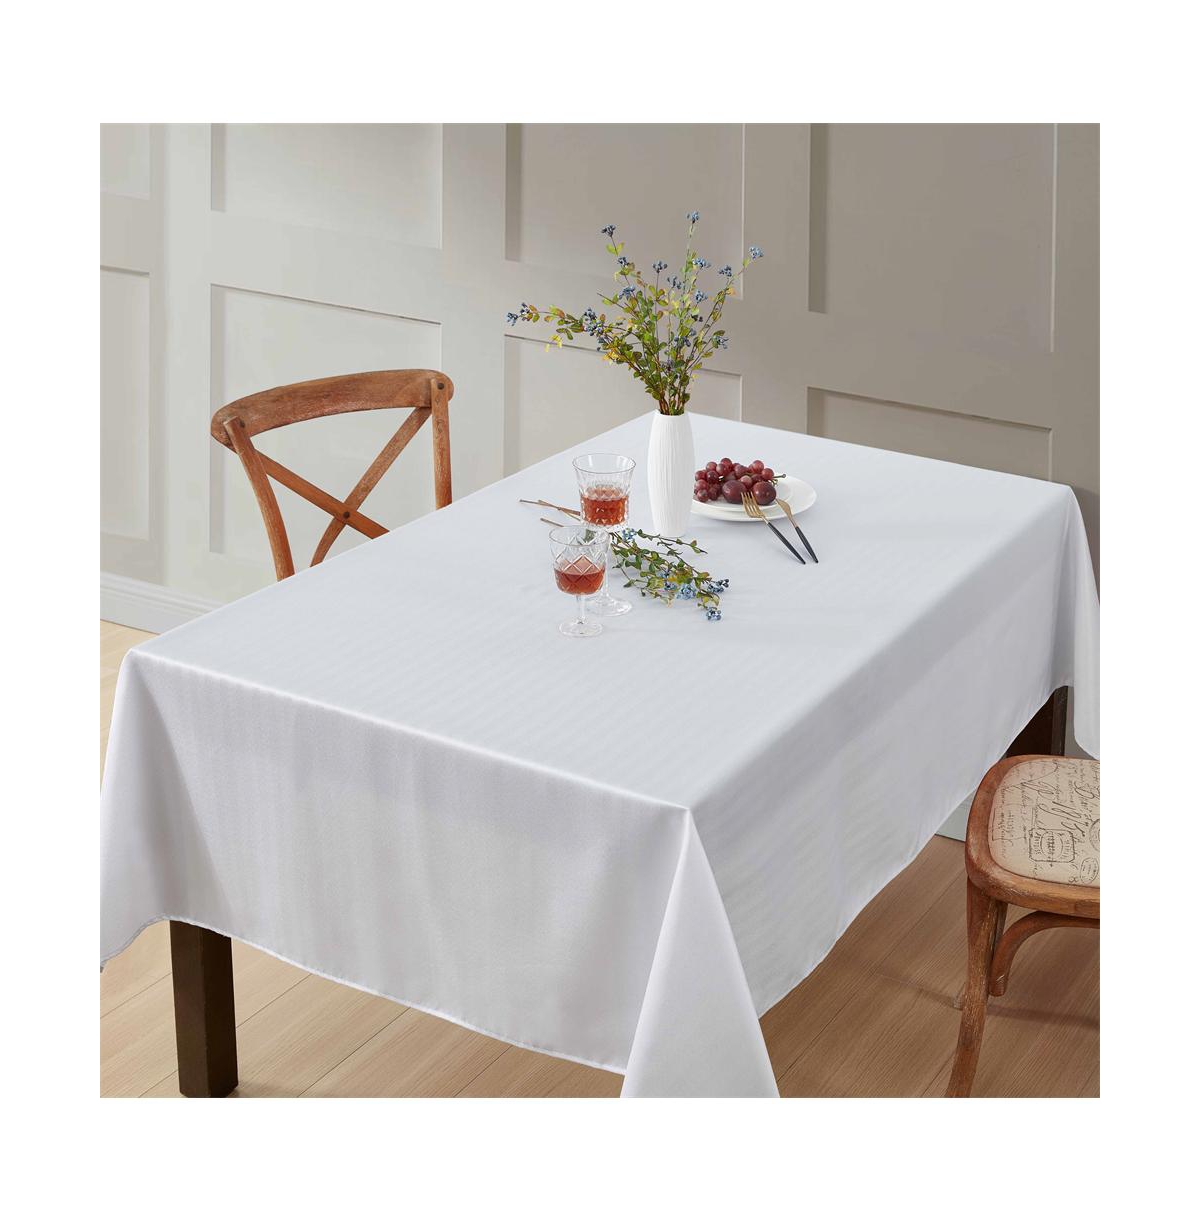 Lincoln Stripe Fabric Tablecloth for Rectangle Table, Advanced Water, Fade, Stain, and Wrinkle Resistance - White